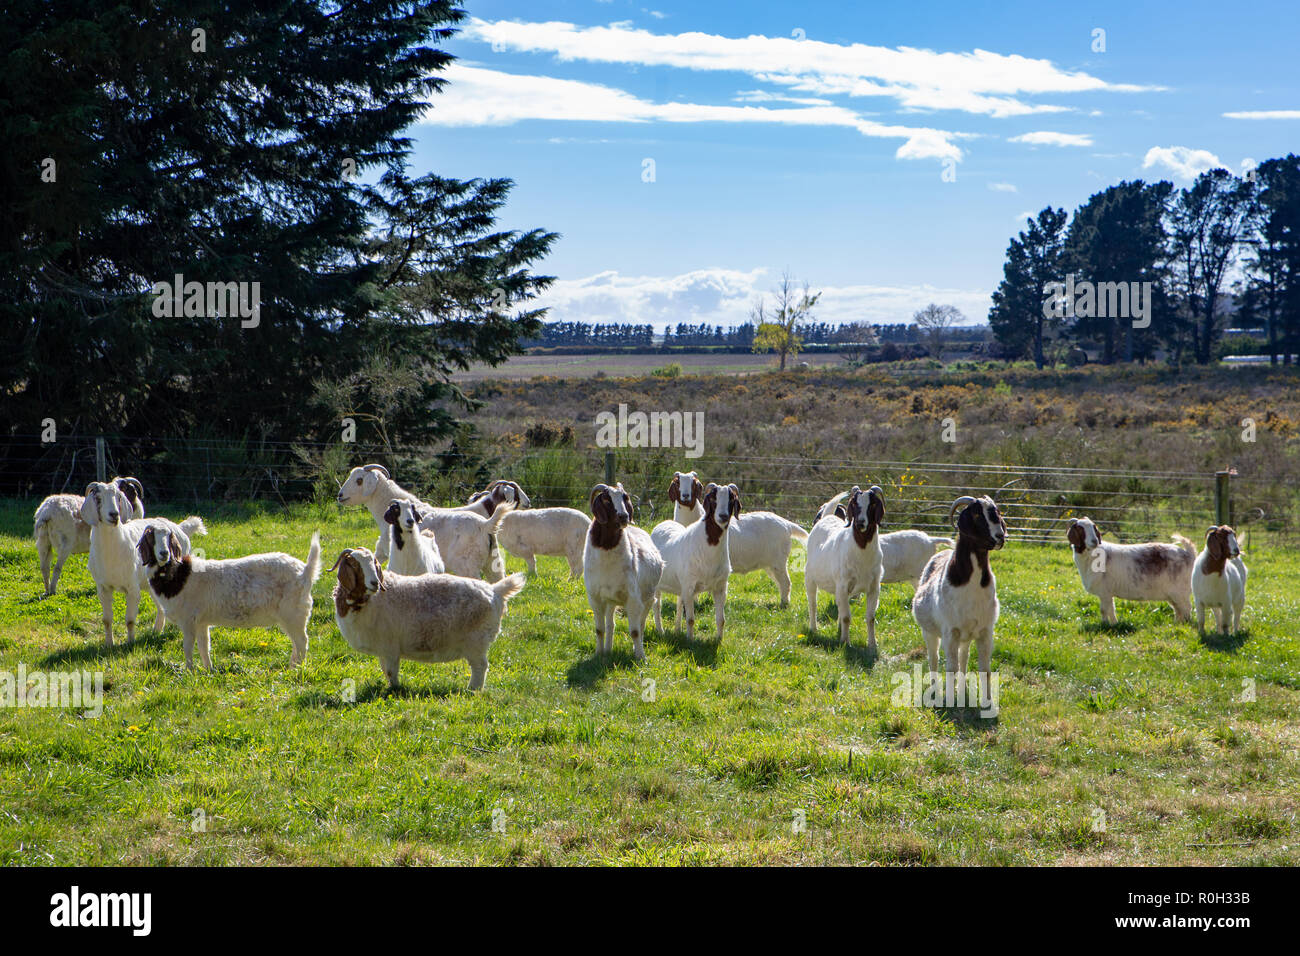 A herd of brown and white goats in a field enjoying the sunny spring day Stock Photo